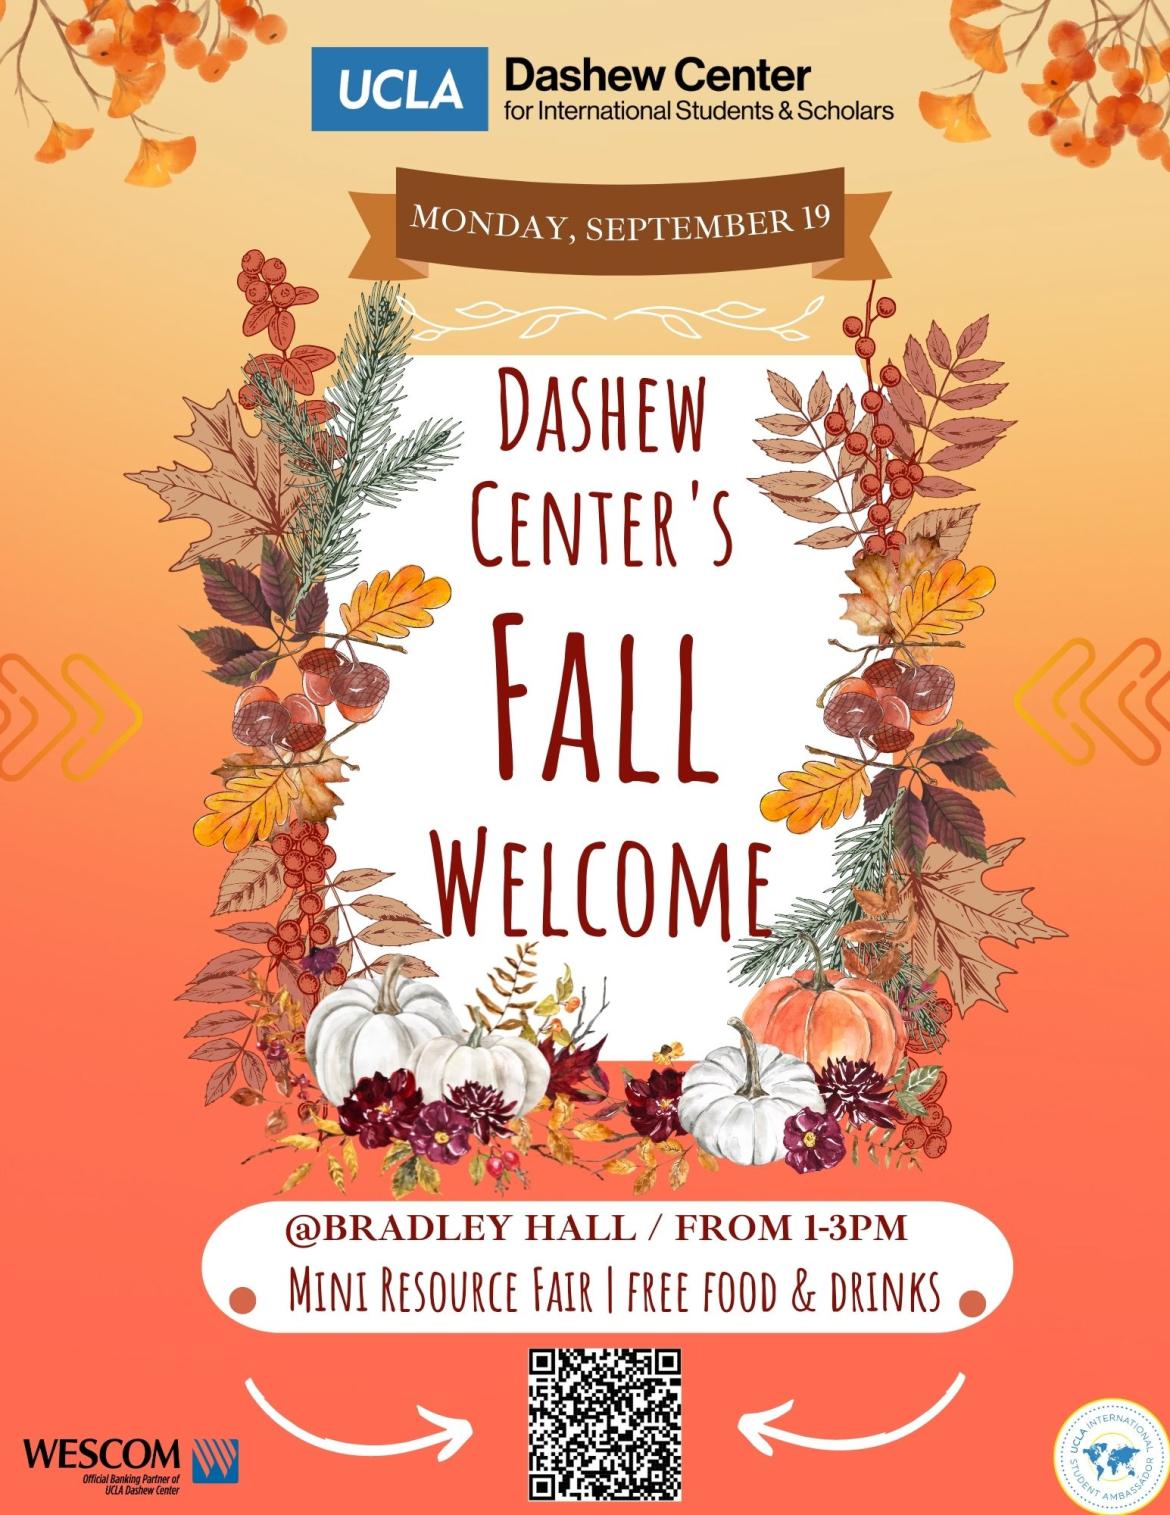 Bright orange, fall themed flyer for Dashew Center's Fall Welcome